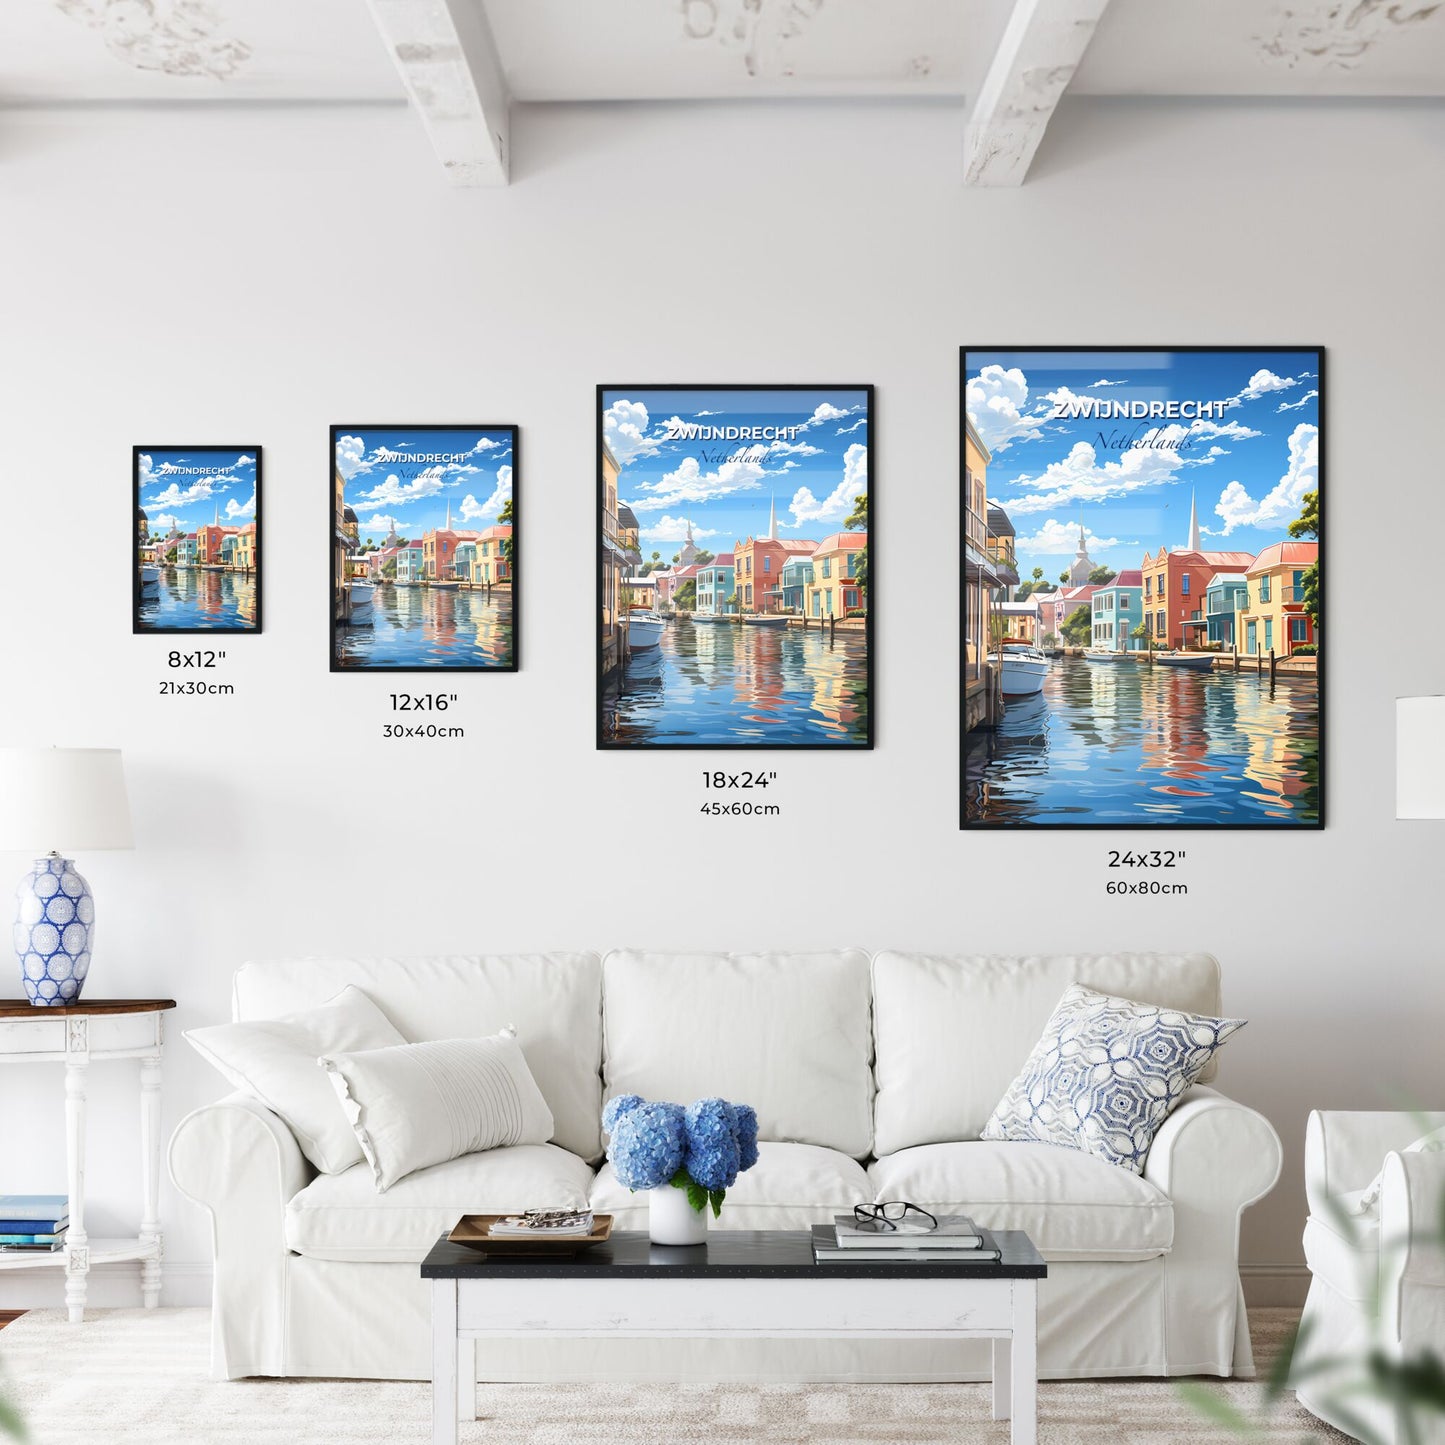 Zwijndrecht, Netherlands, A Poster of a water way with buildings and boats Default Title